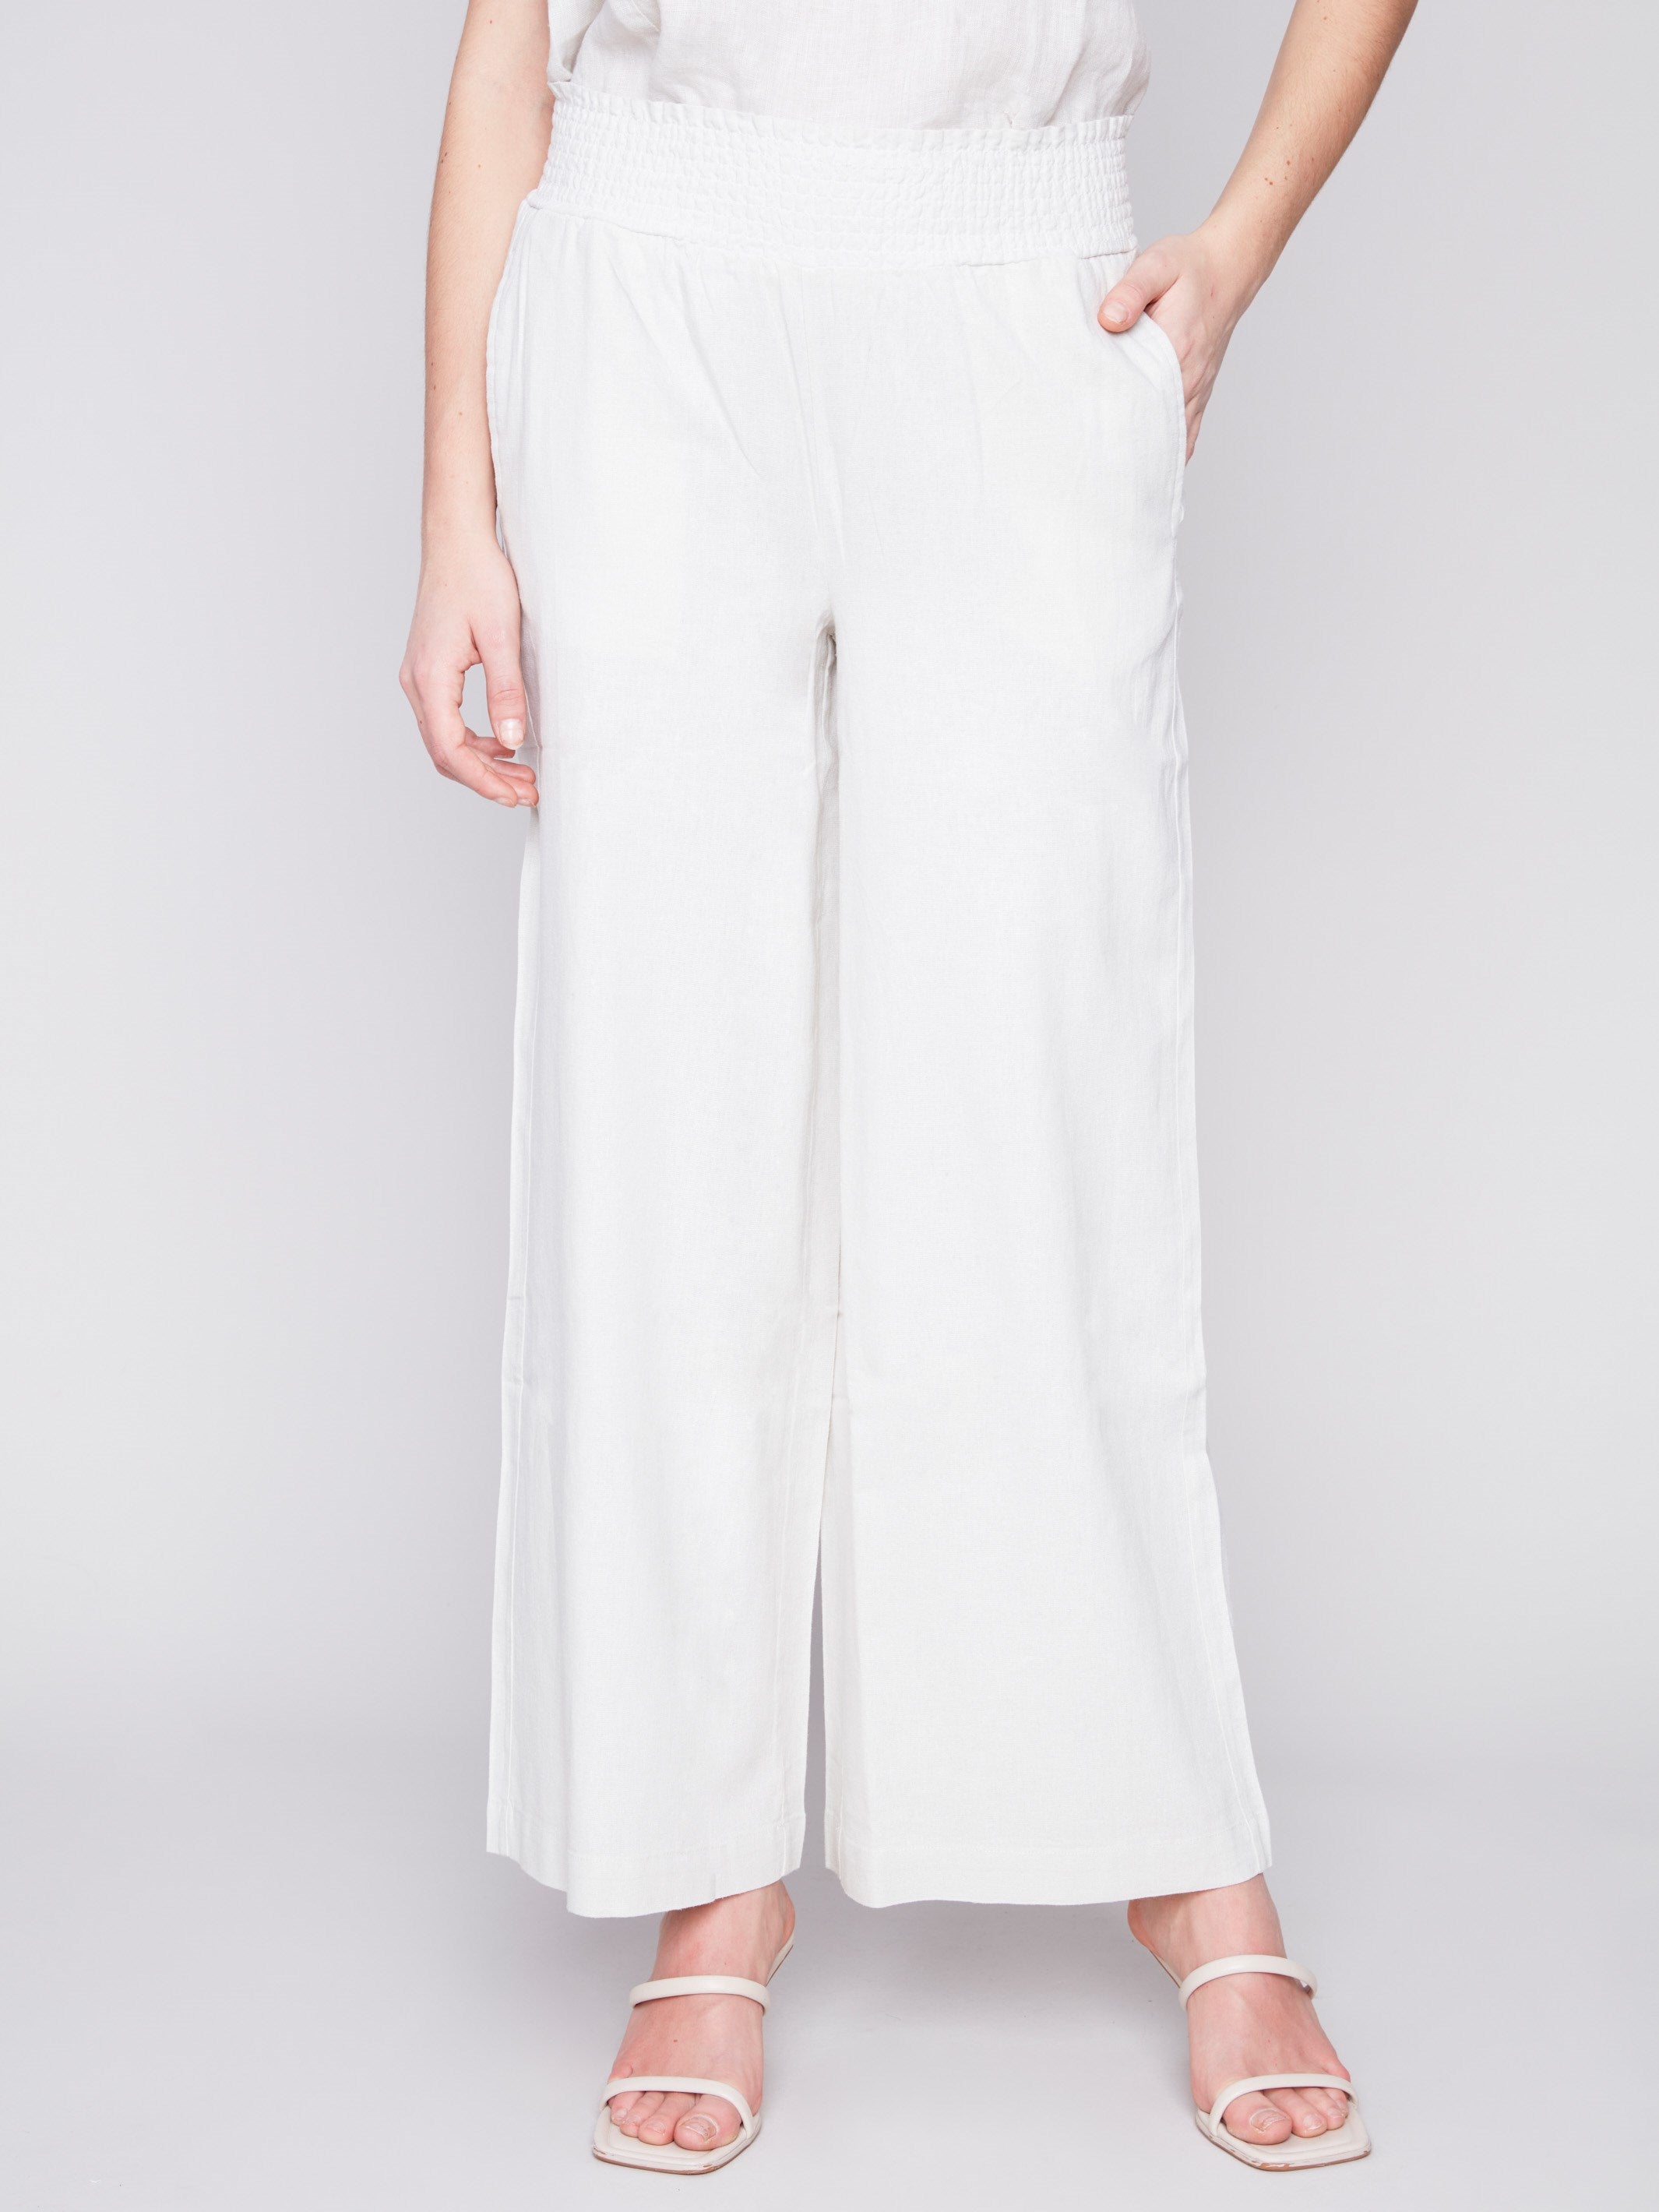 Elastic Waist Linen-Blend Pull-On Pants - Natural - Charlie B Collection Canada - Image 4